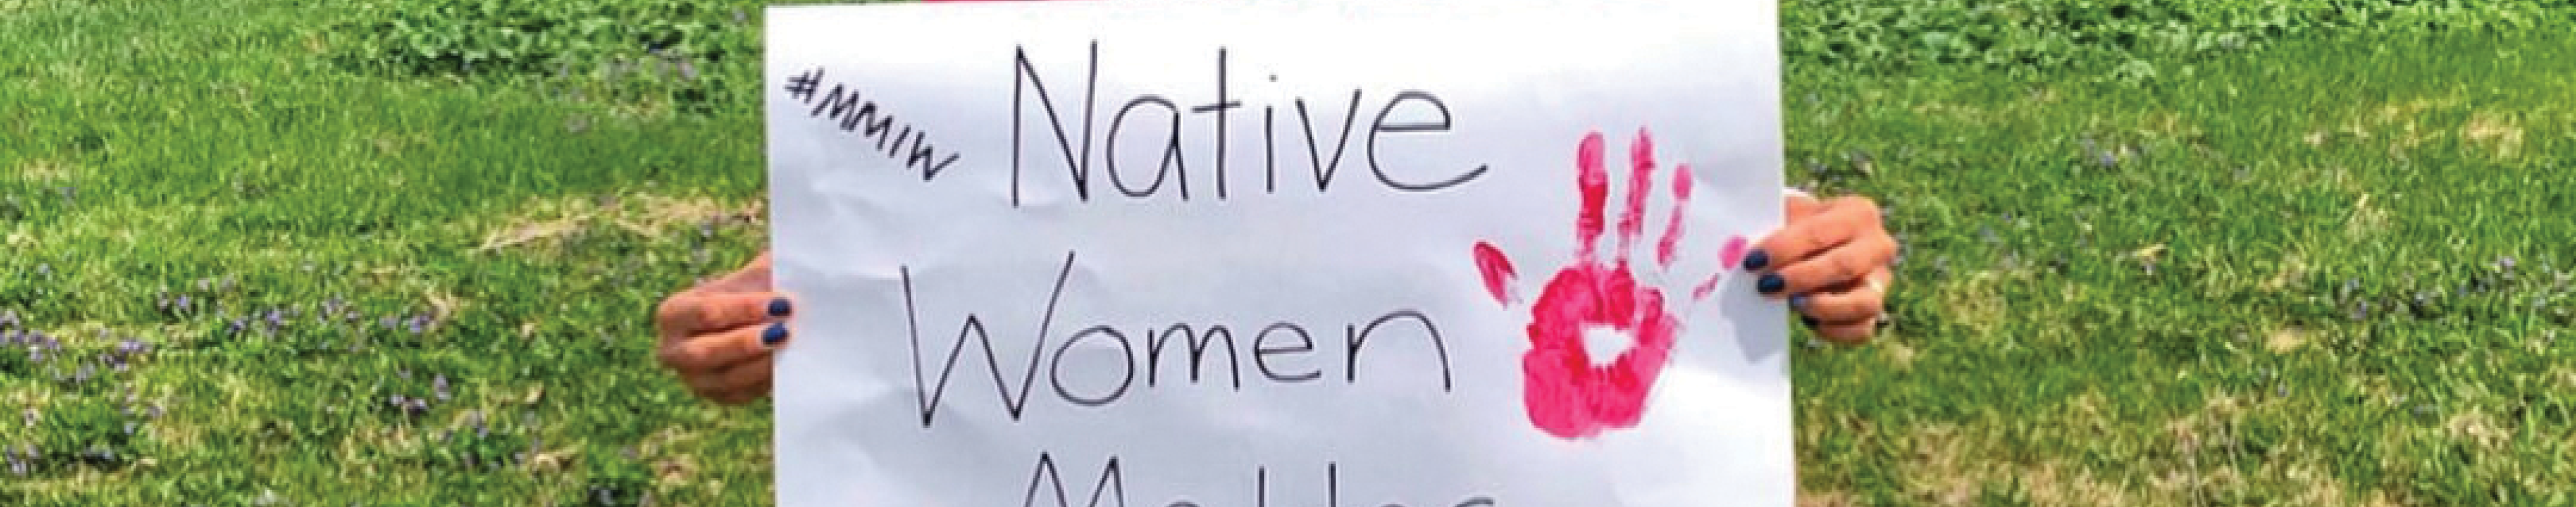 An activist raises awareness of missing and murdered Indigenous women.